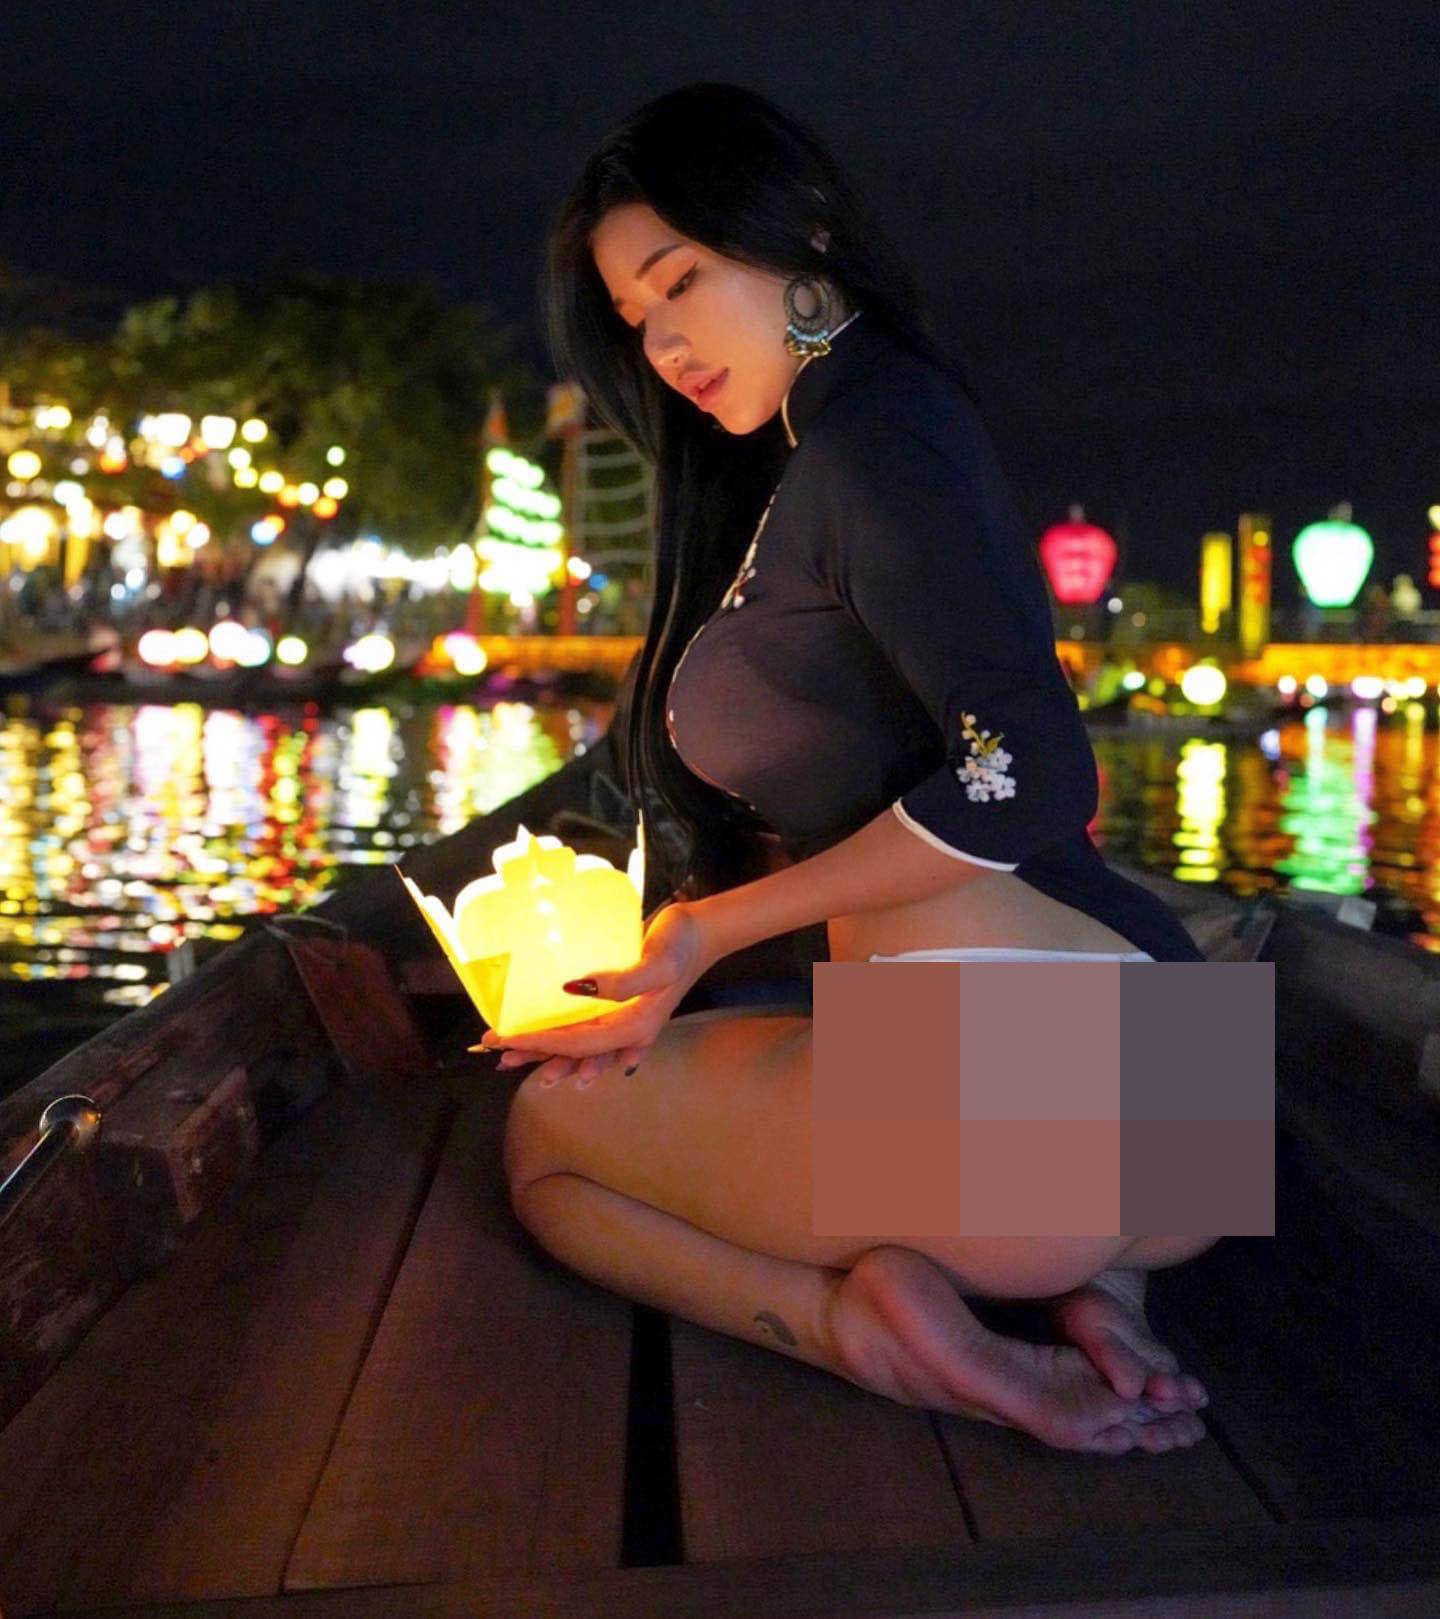 Famous model criticized for wearing ao dai to show off her underwear in Hoi An - 2